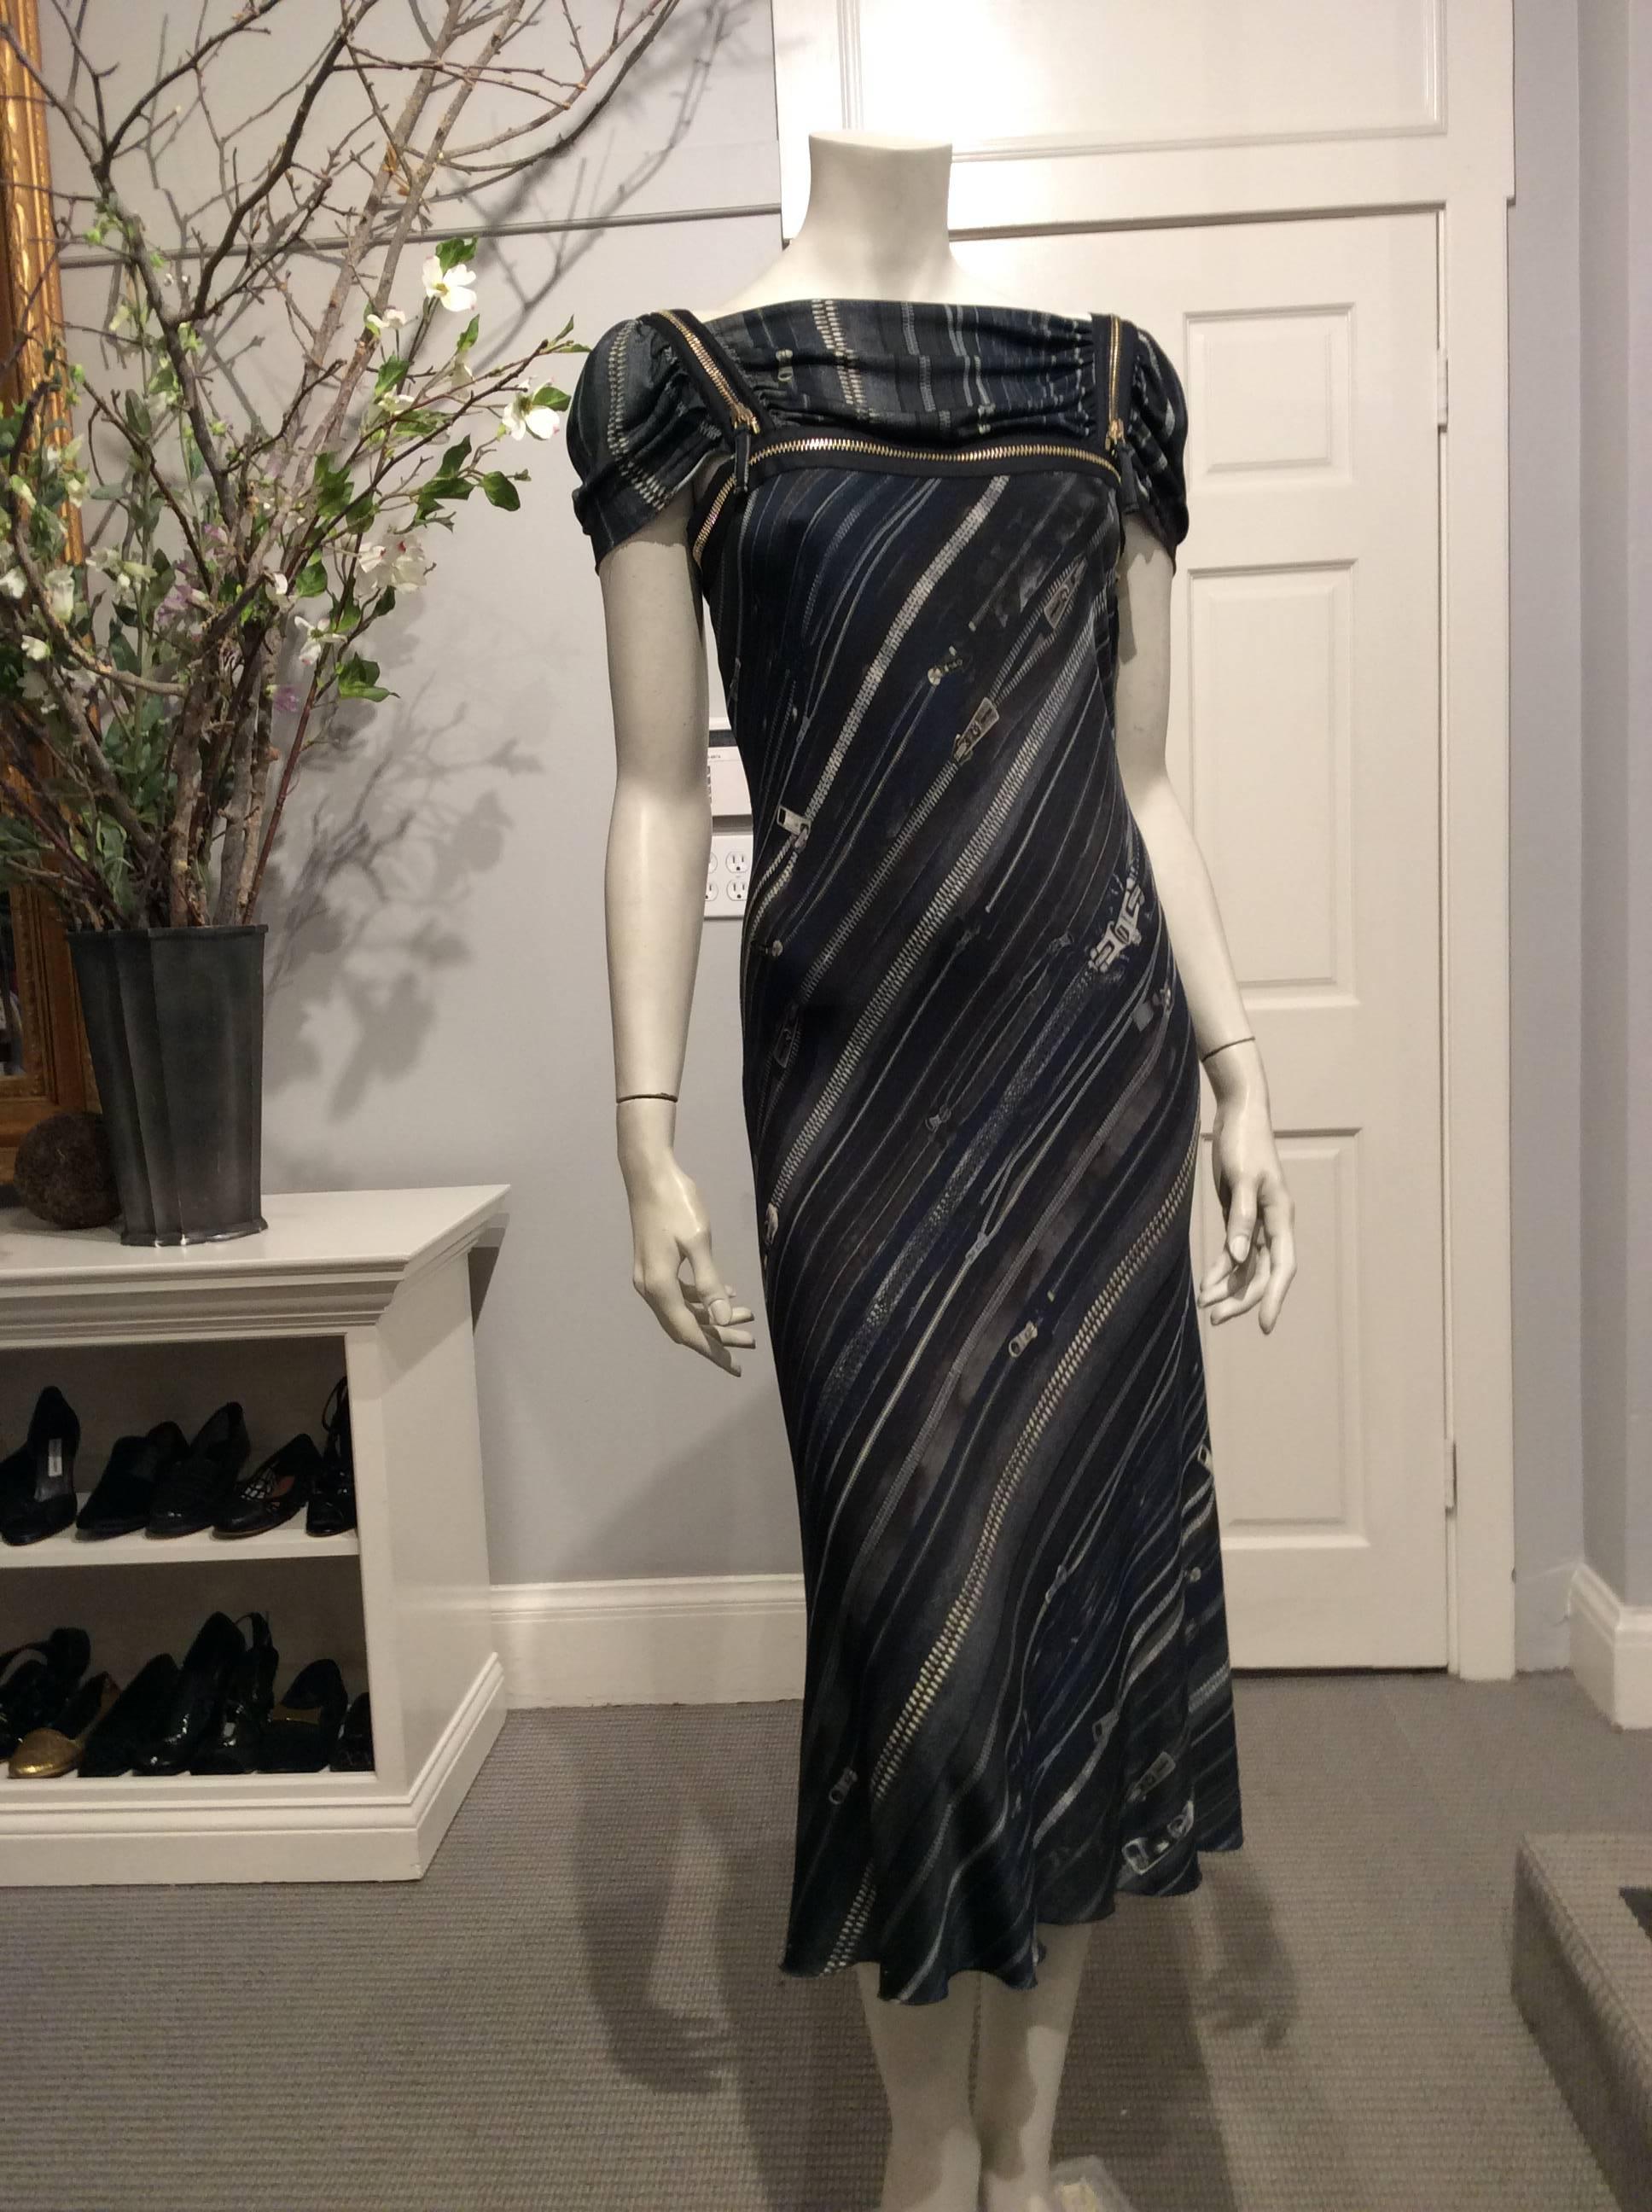 This Jean Paul Gaultier dress in grey, green, navy, and black is covered in an eyecatching trompe l'oeil zipper print. There are real working zippers on both shoulders as well as one above the bust and one in the back above the shoulder blades.  The